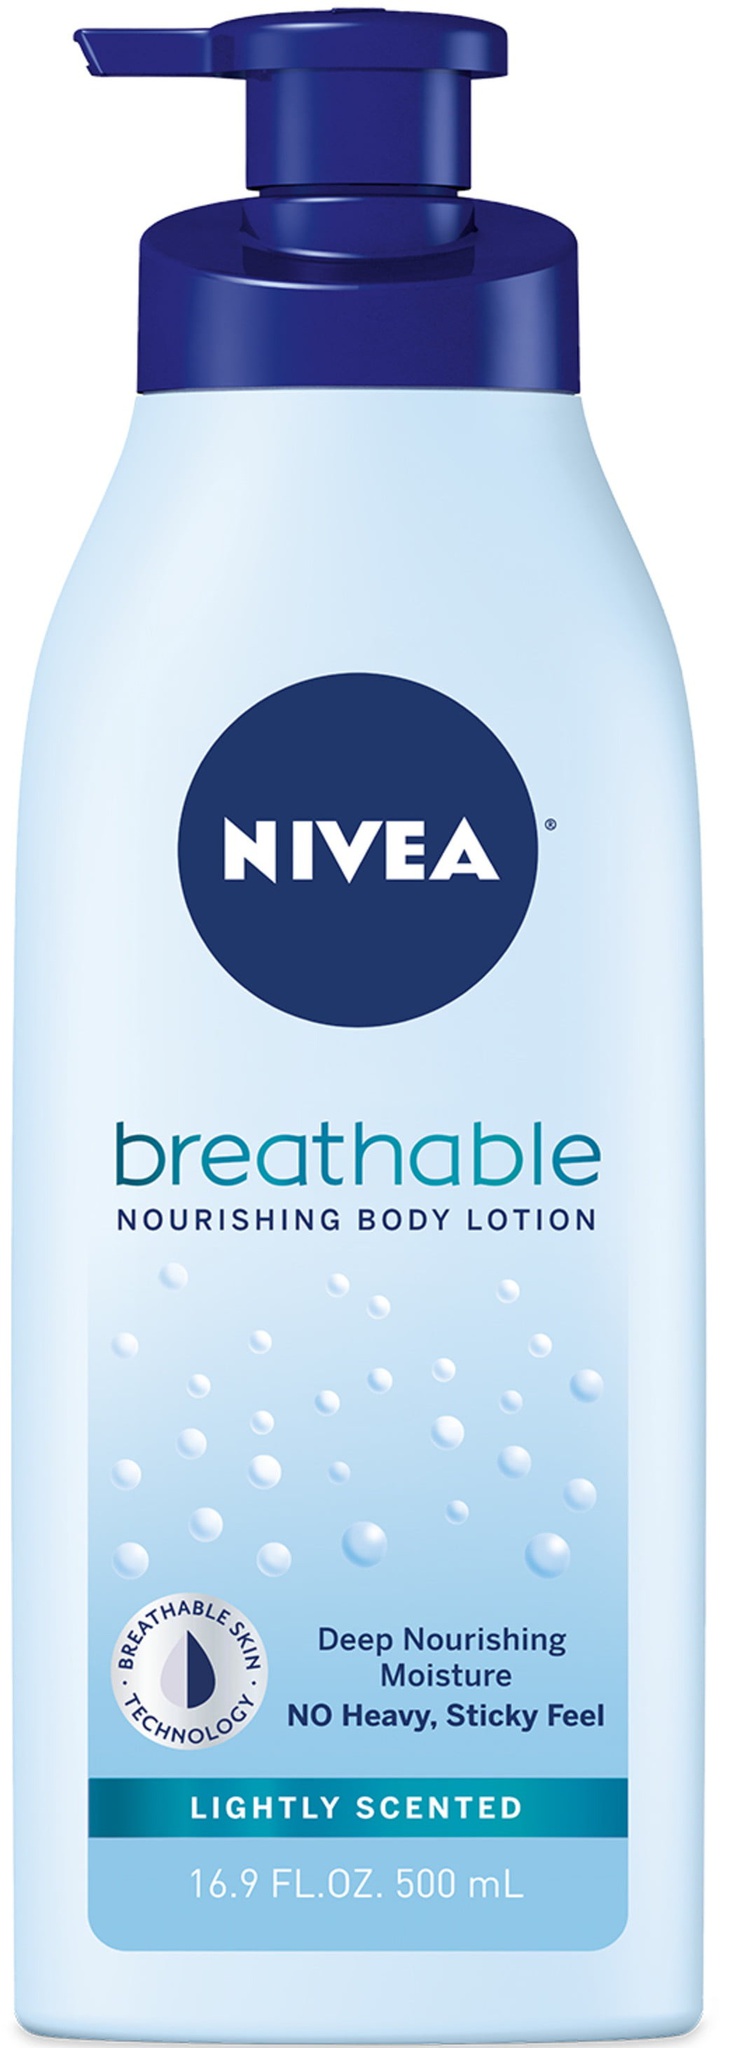 Nivea Breathable Lotion Lightly Scented